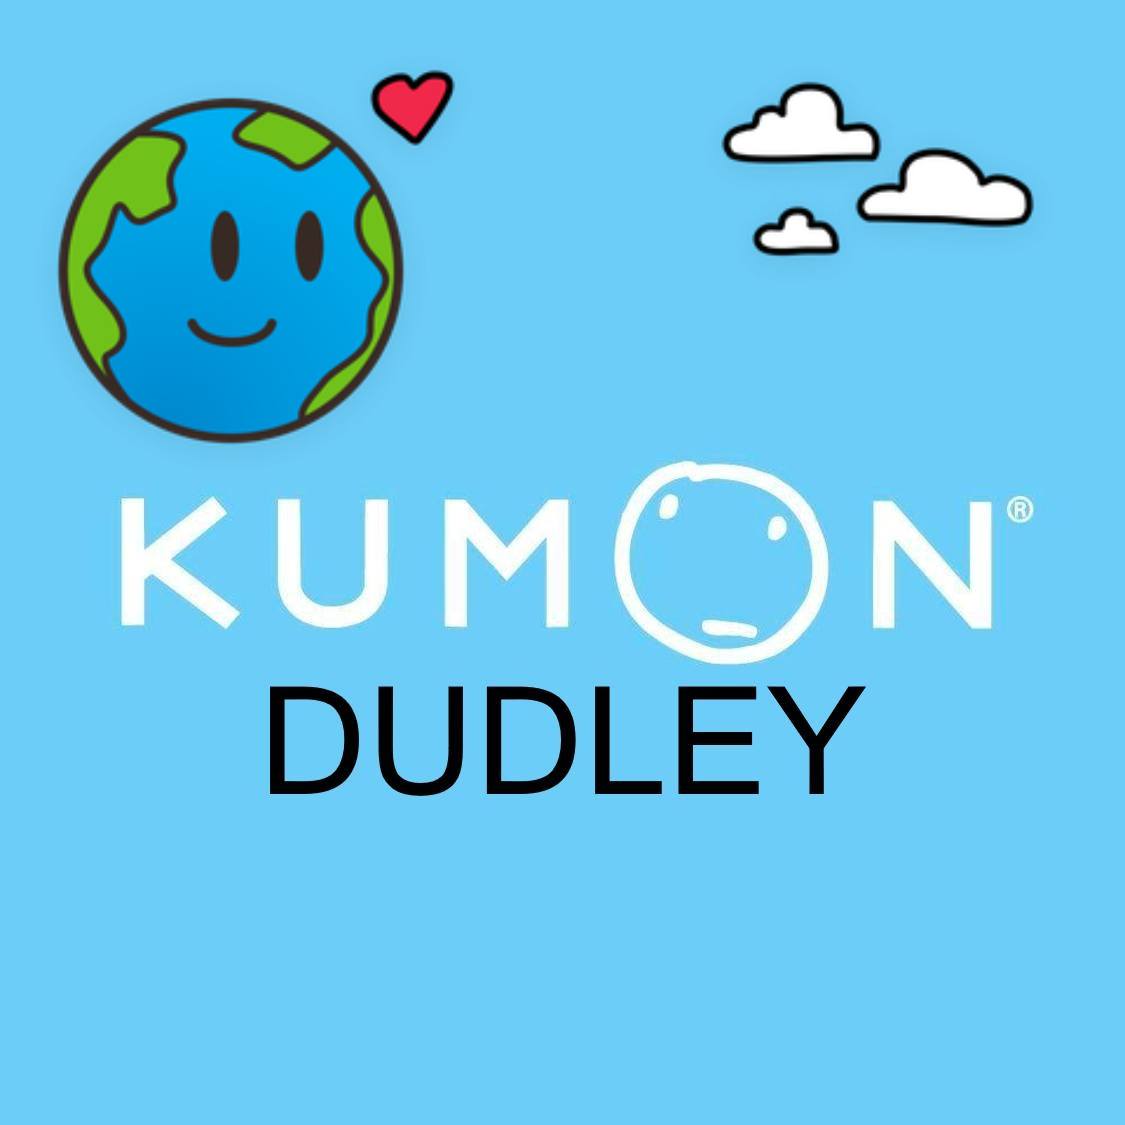 Kumon Dudley Maths and English Study Centre